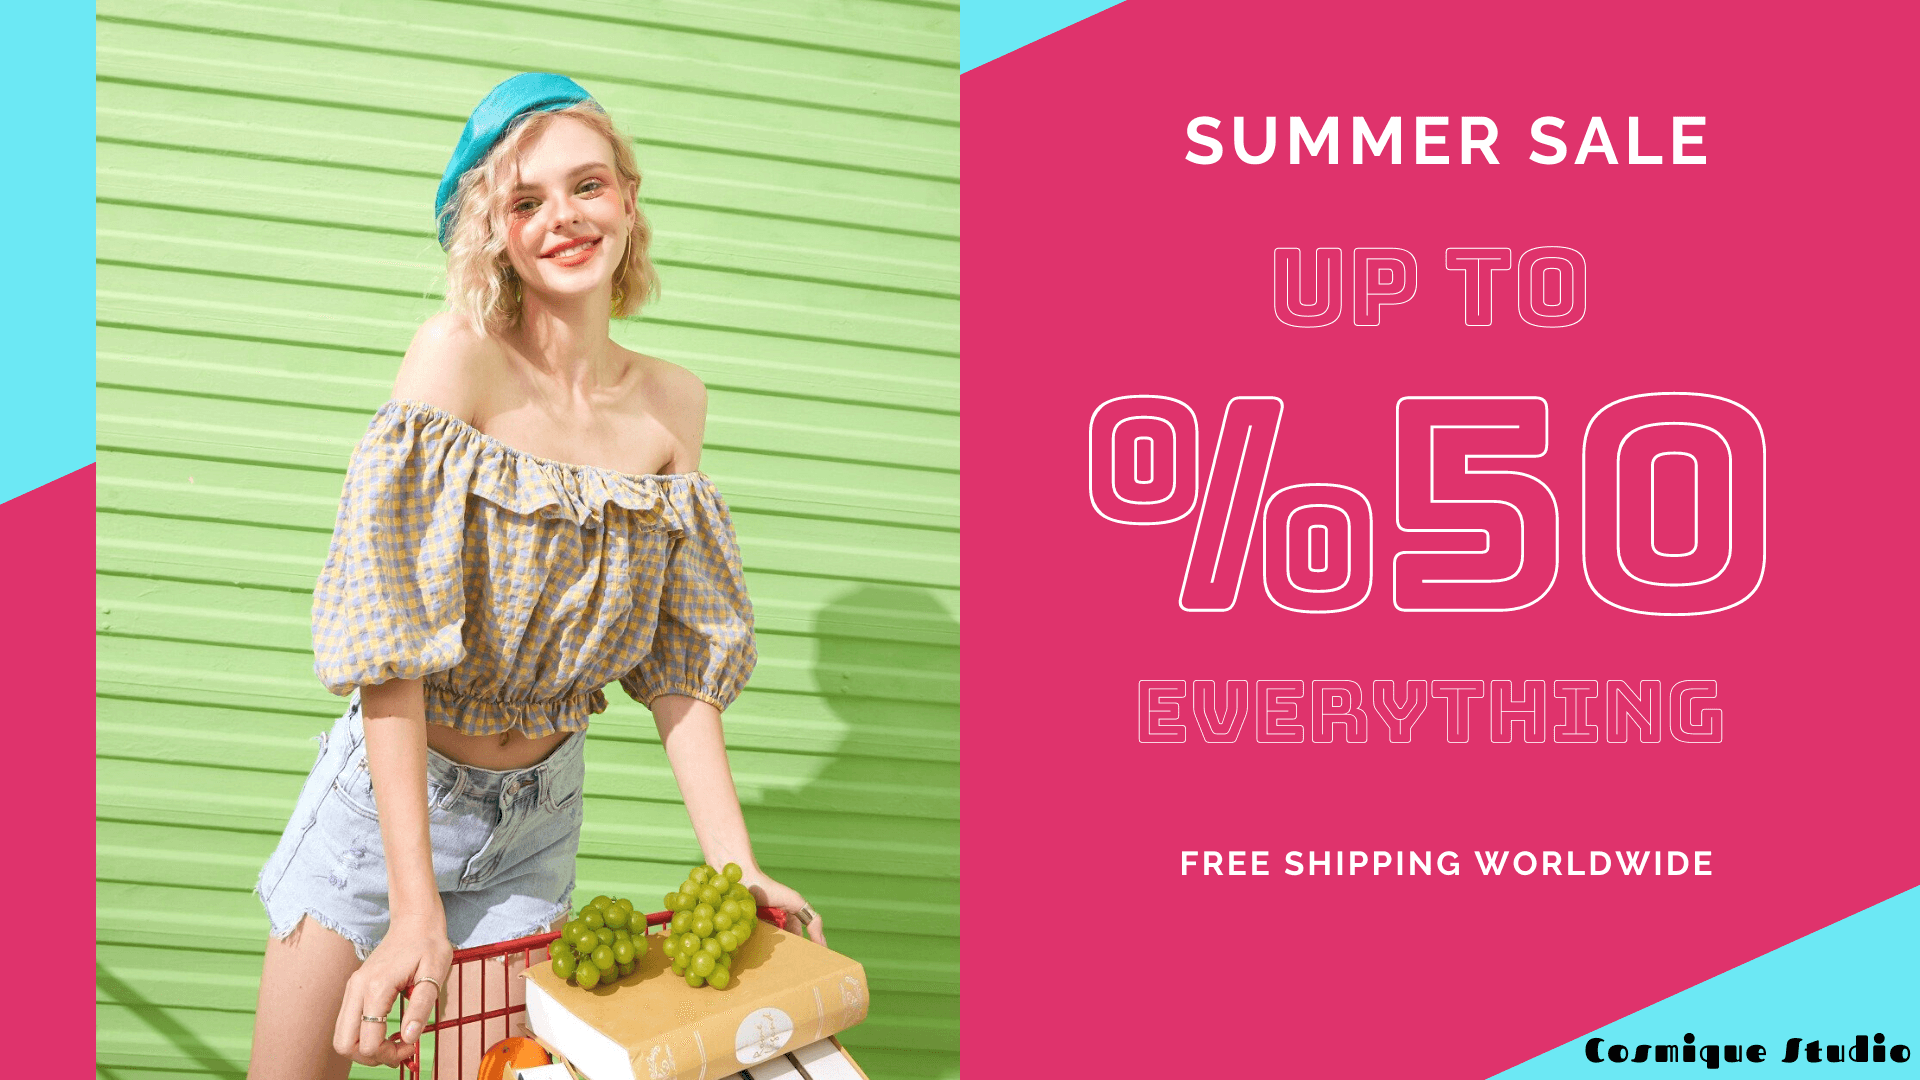 Summer sale banner with girl wearing aesthetic clothes